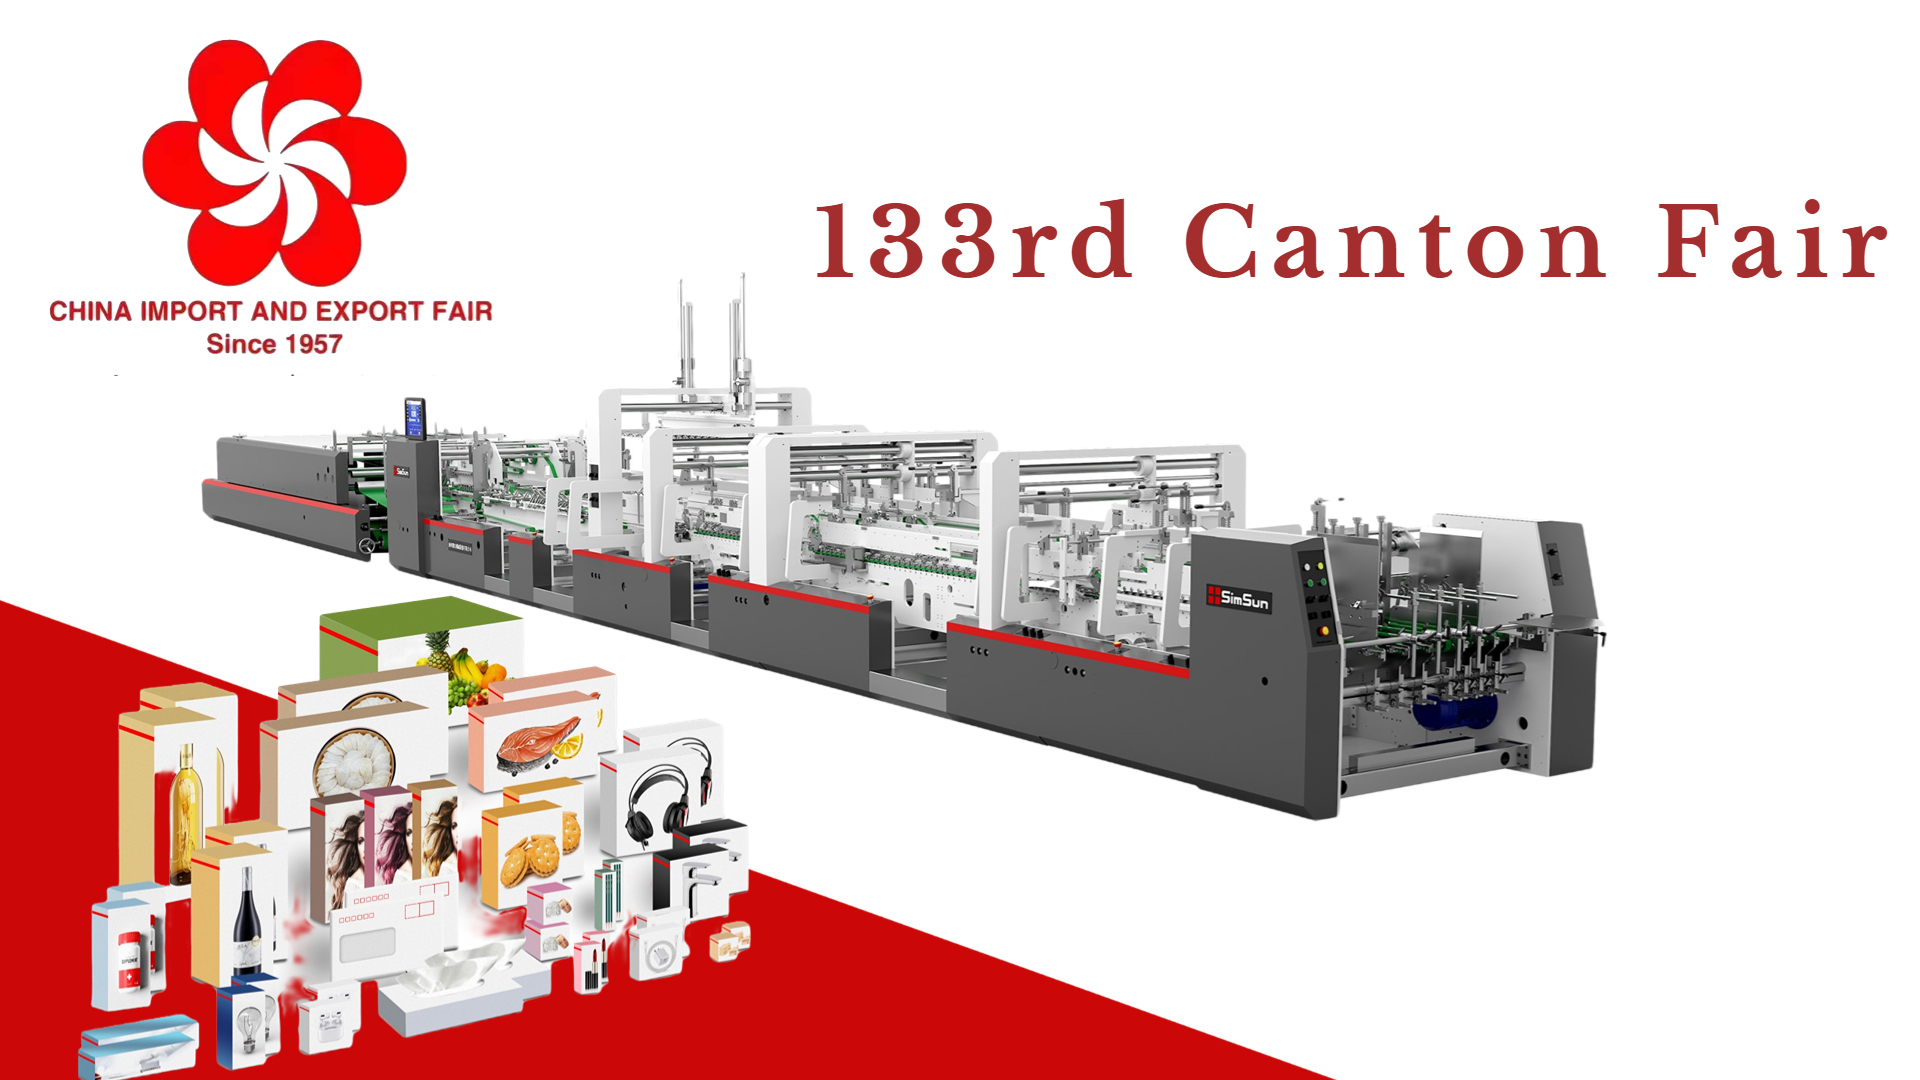 133rd Canton Fair in 2023- Carton Box is the MOST popular product